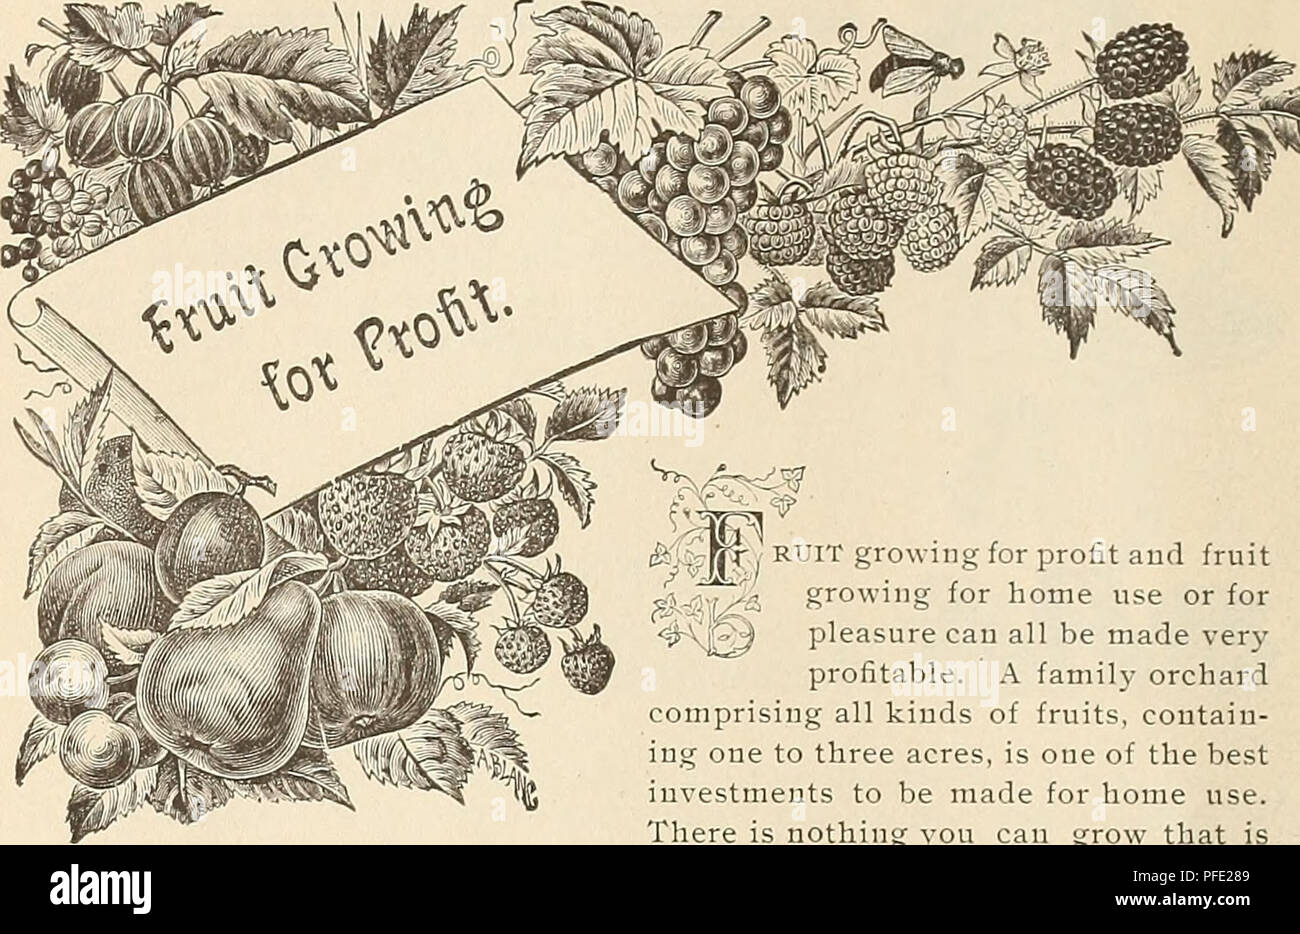 . Descriptive catalogue of Mill Creek Nurseries : fruit growing, its profits and slect market varieties. Nurseries (Horticulture), Georgia, Catalogs; Vegetables, Catalogs; Fruit trees, Catalogs. 32. $&gt;.. Br( RUIT growing for profit and fruit growing for home use or for pleasure can all be made very profitable. A family orchard comprising all kinds of fruits, contain- ing one to three acres, is one of the best investments to be made for home use. There is nothing you cau grow that is more healthful than fruit. The more we consume the less medical bills we have to pay. For profit, there is no Stock Photo